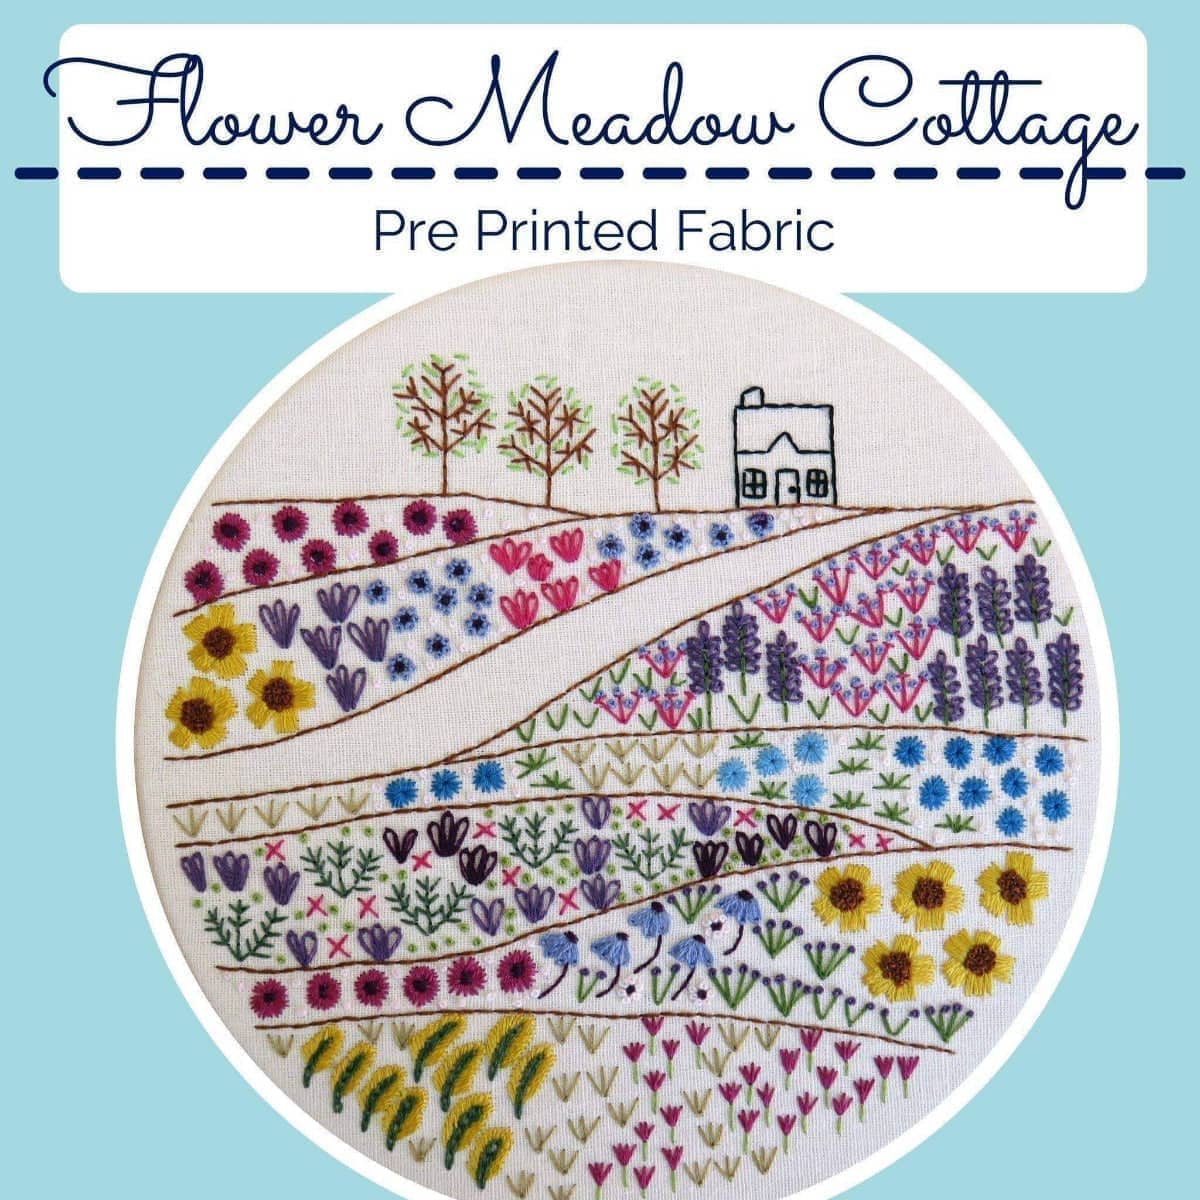 Flower Meadow Cottage, Pre Printed Embroidery Fabric Panel PLUS PDF Pattern , Pre Printed Fabric Pattern , StitchDoodles , embroidery hoop kit, embroidery kits for adults, embroidery kits for beginners, embroidery pattern, flower embroidery, hand embroidery, hand embroidery fabric, hand embroidery kit, hand embroidery pattern, modern embroidery kits, nurge embroidery hoop, PDF pattern, unique embroidery kits, wildlife embroidery , StitchDoodles , shop.stitchdoodles.com